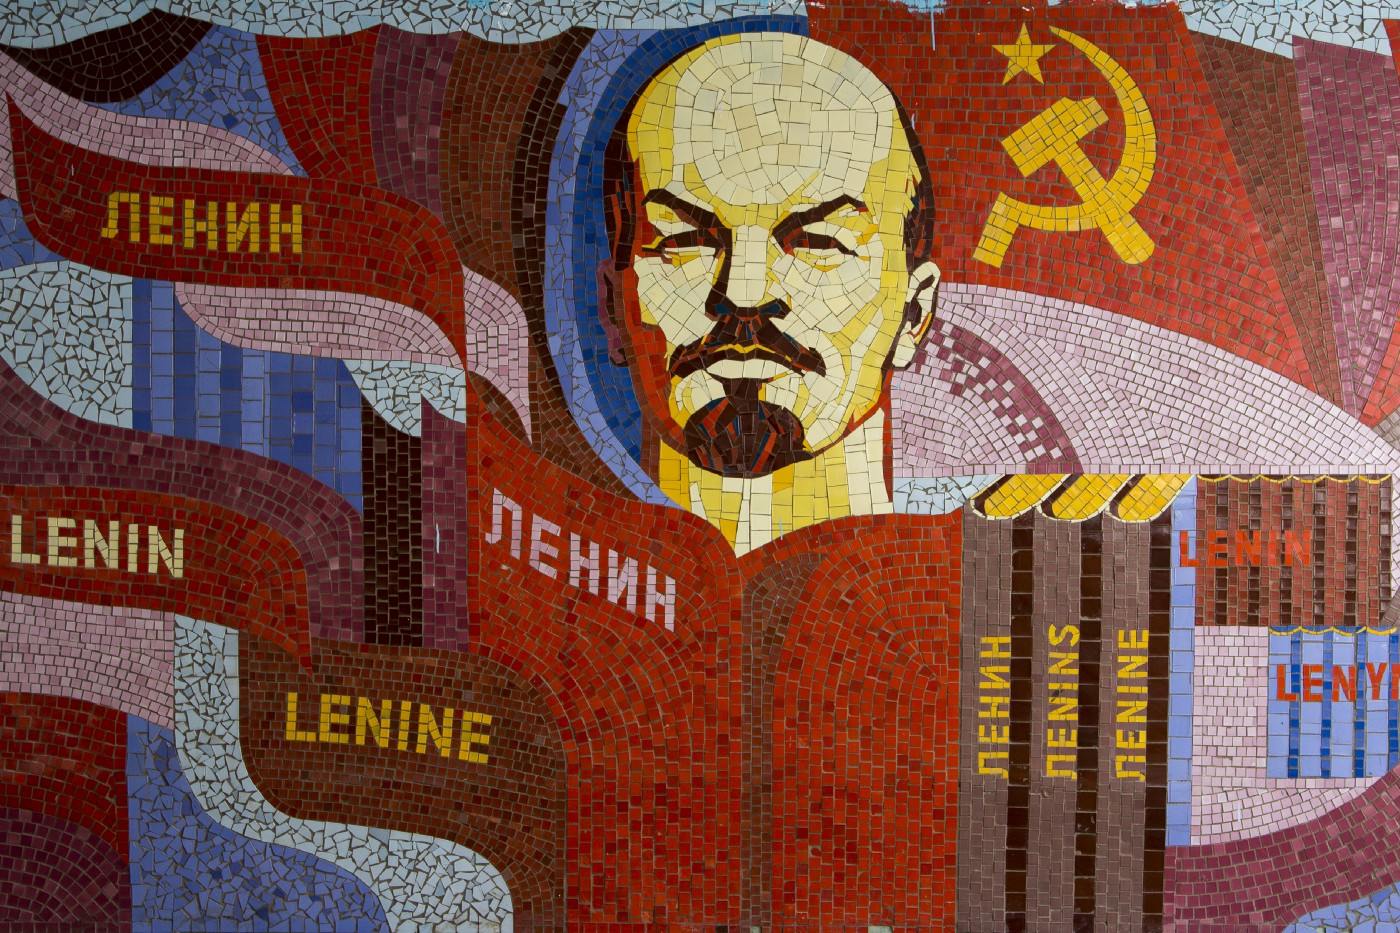 Why Didn’t Western Countries Develop Like the Soviet Union After World War 2?